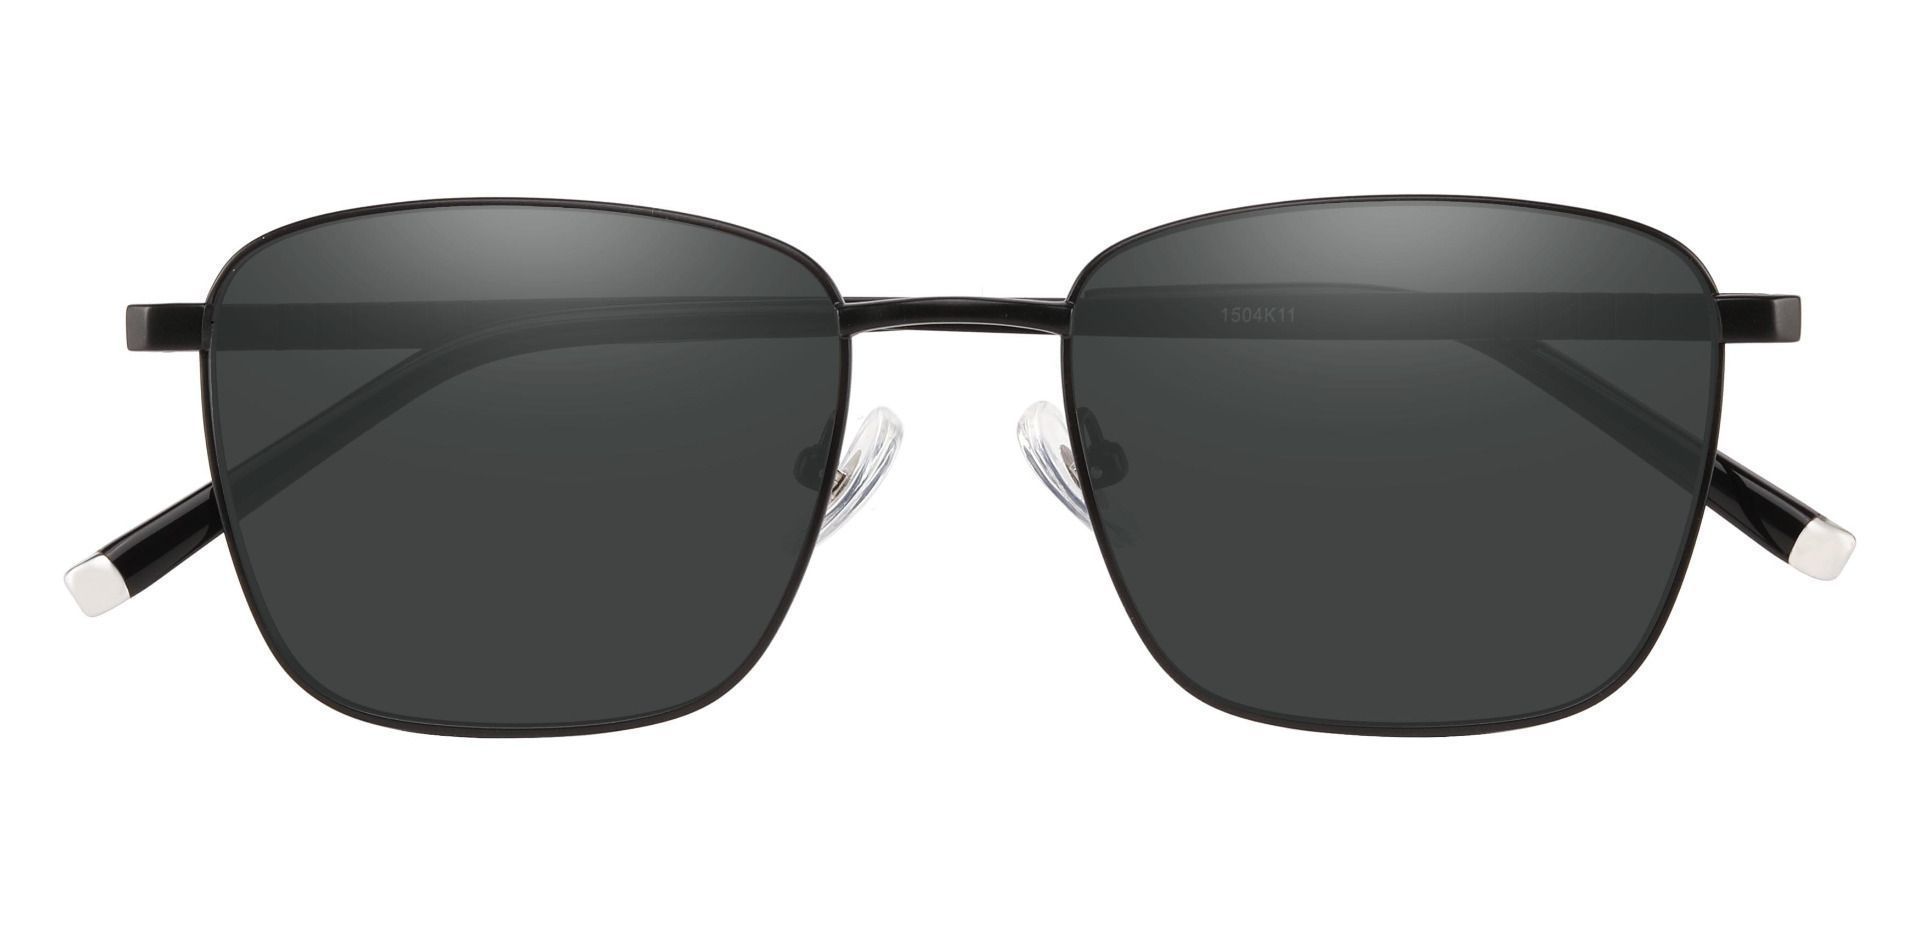 May Square Lined Bifocal Sunglasses - Black Frame With Gray Lenses